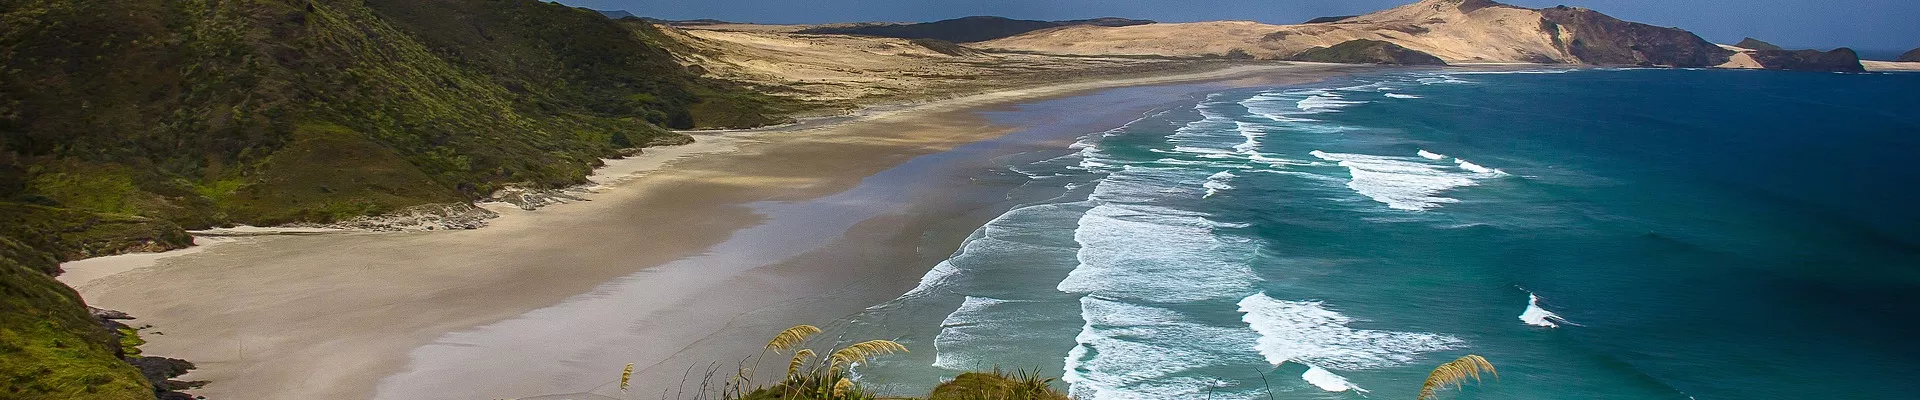 Guide to Campervan Holidays Across New Zealand - image